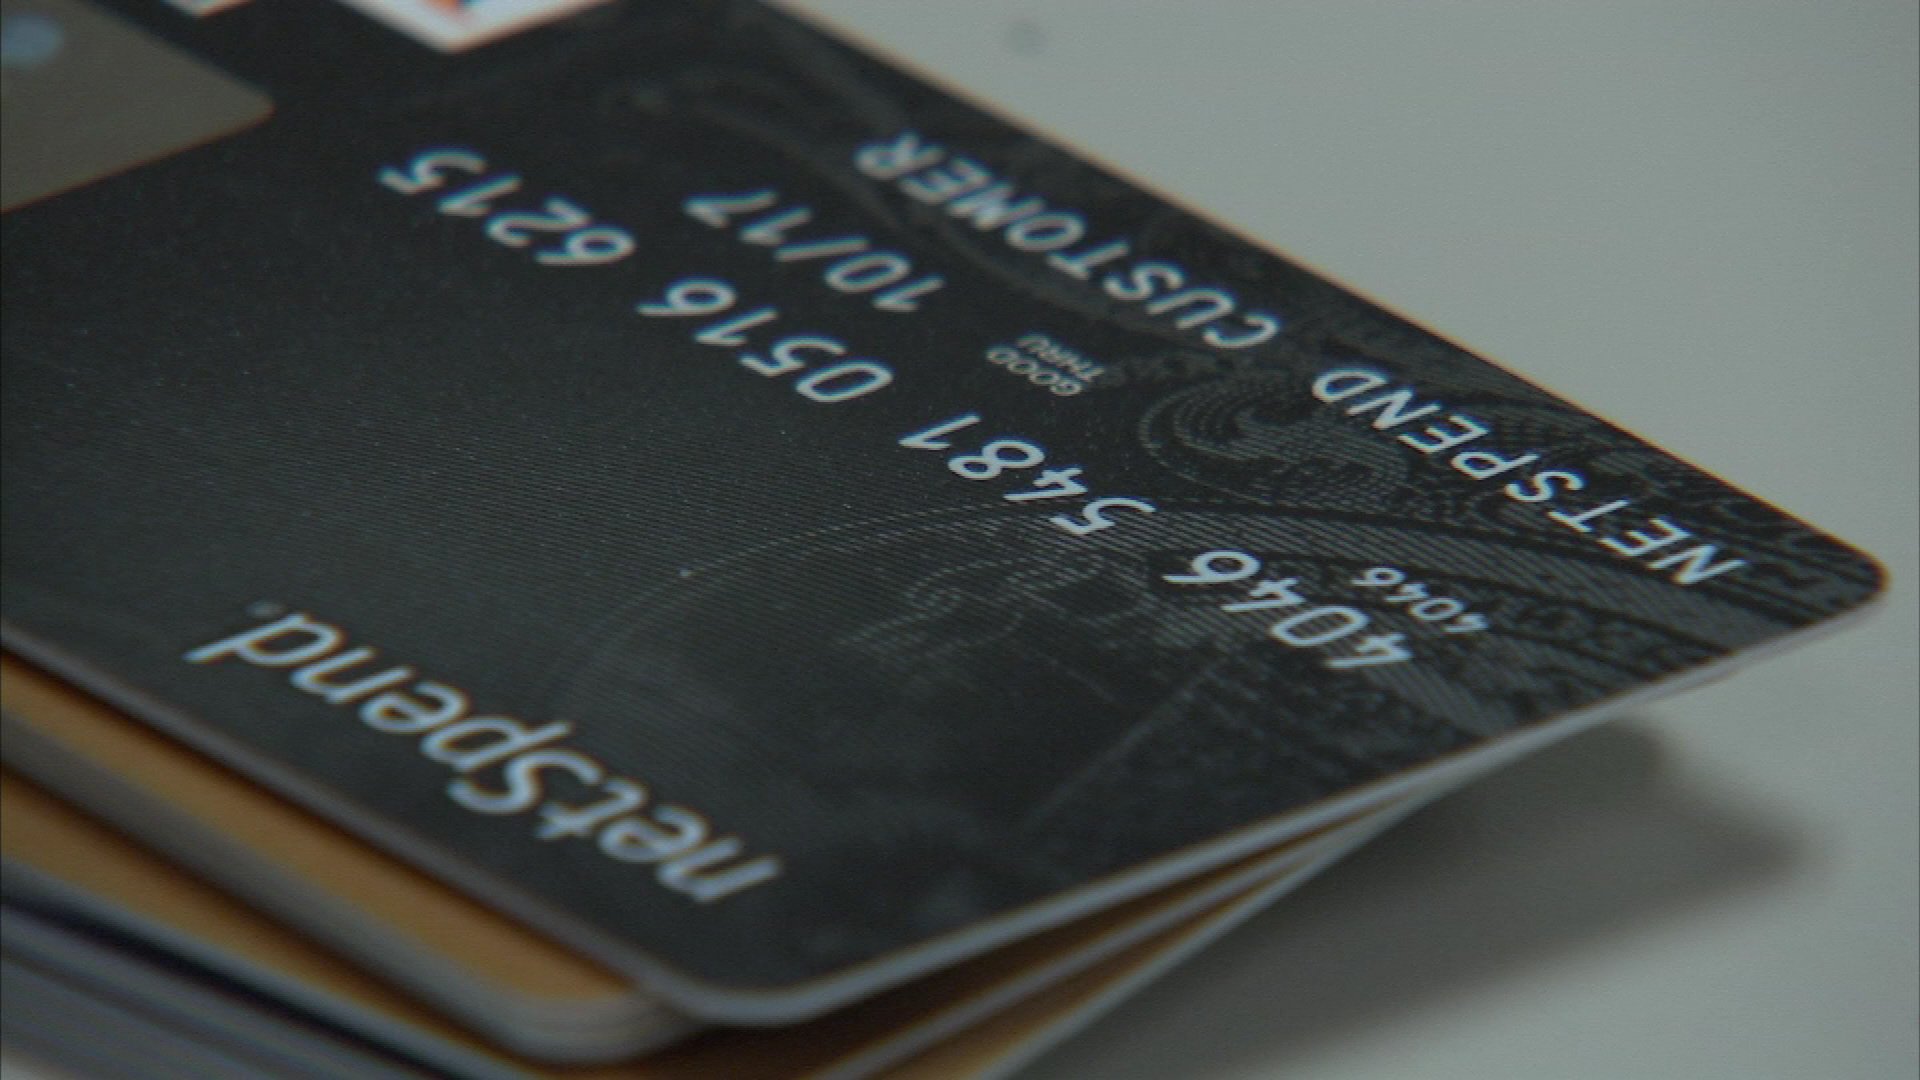 23 million stolen credit cards for sale on the dark web in the first half of 2019